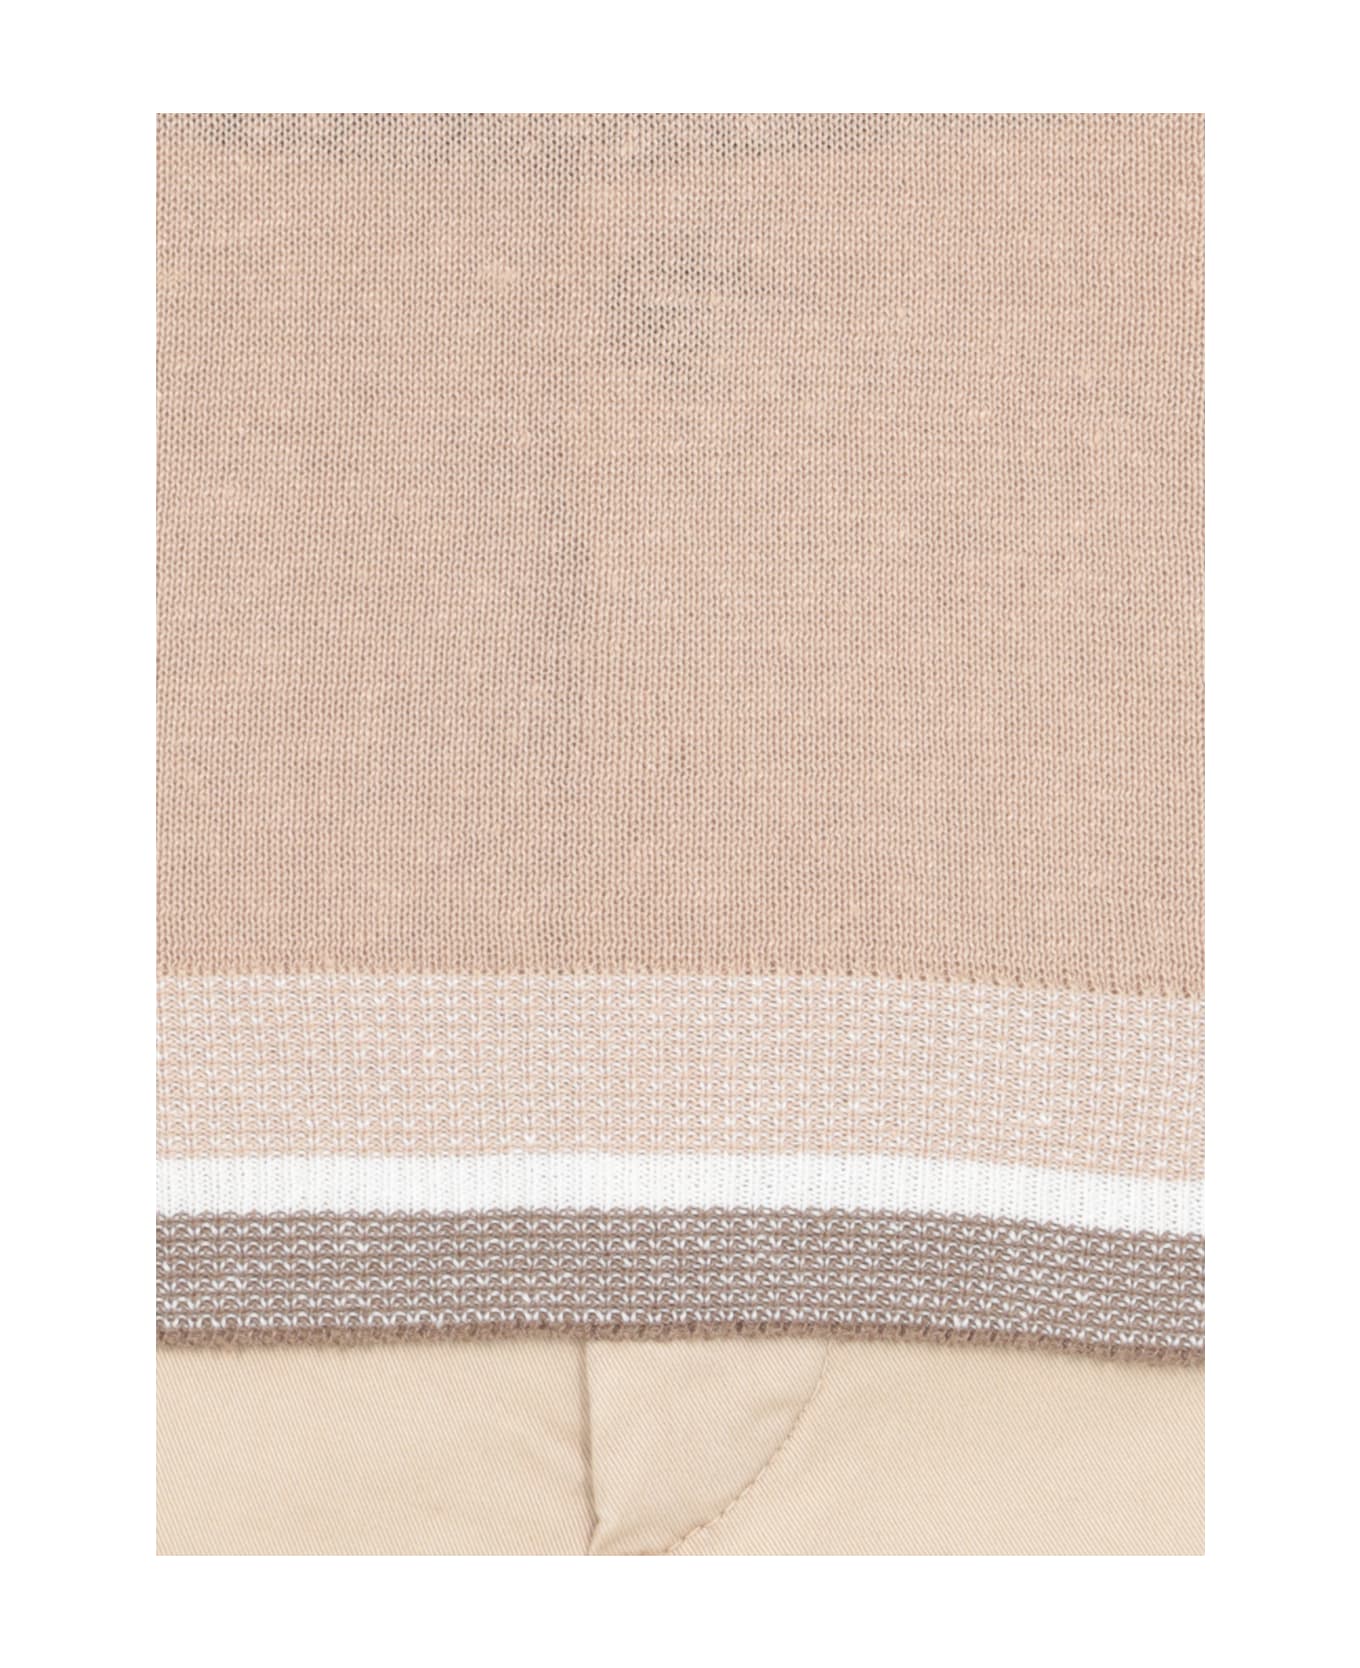 Peserico Linen And Cotton T-shirt - Beige